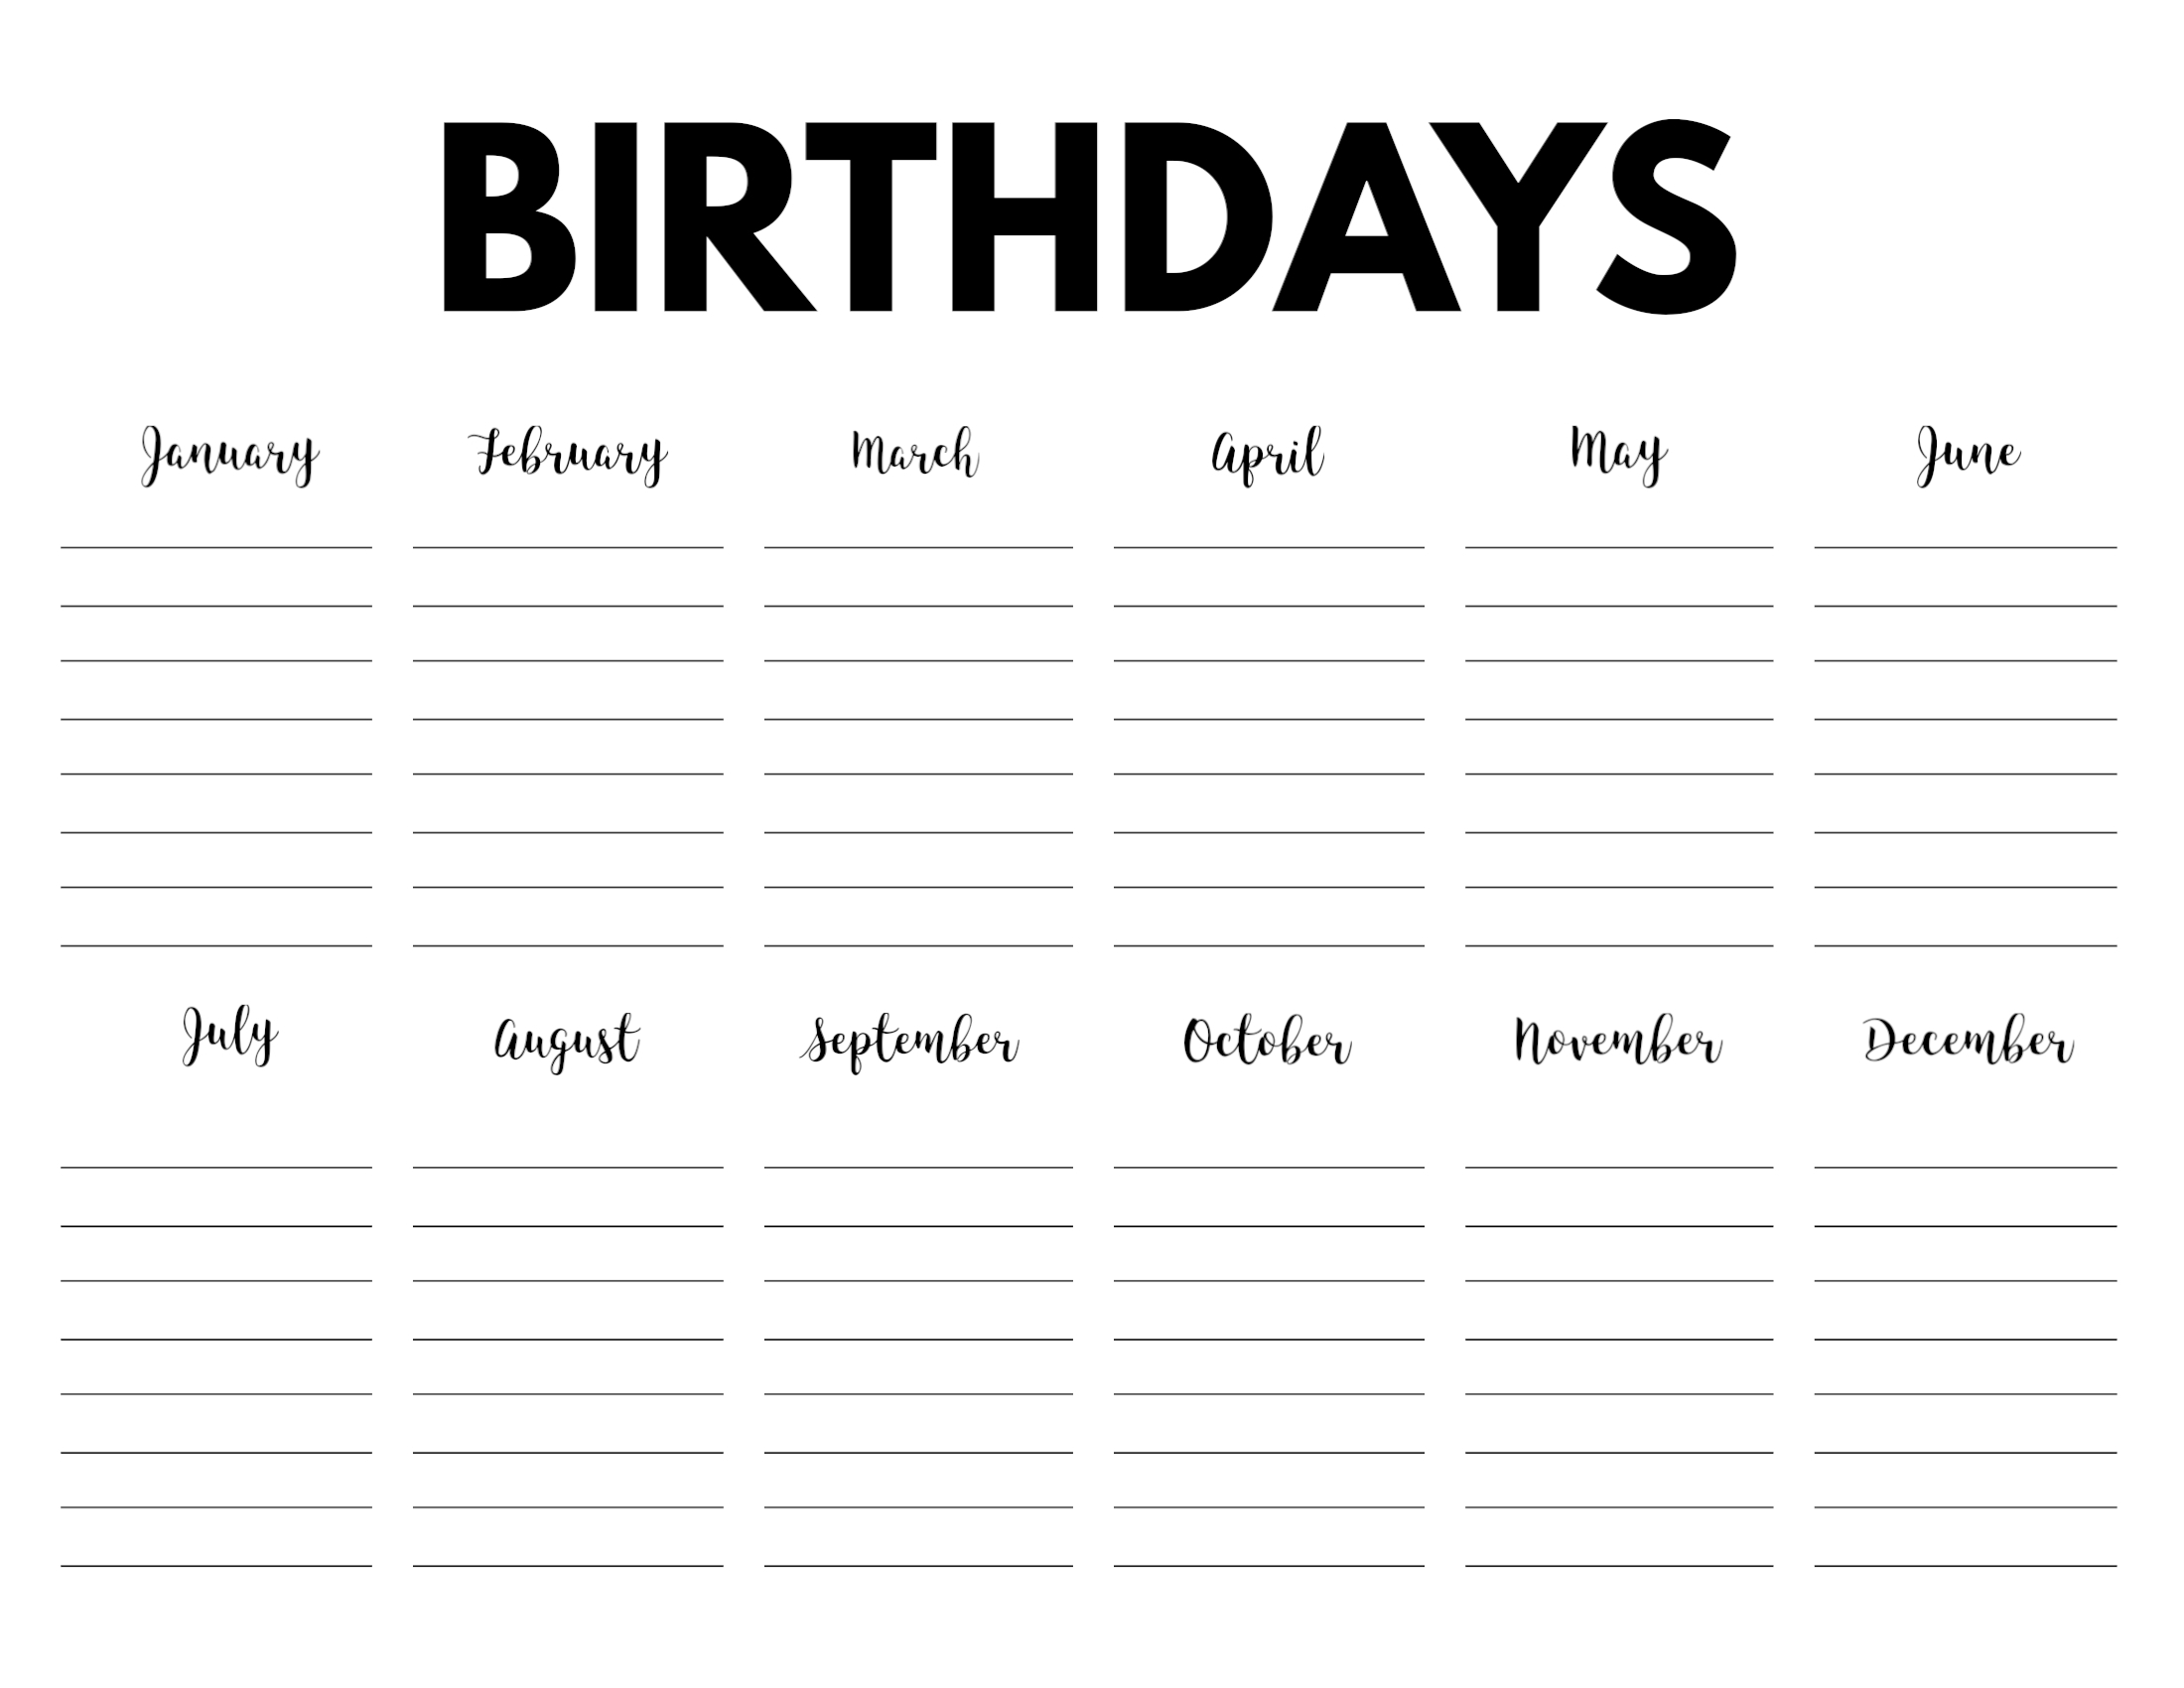 The 12 Month Birthday Calendar Template | Get Your